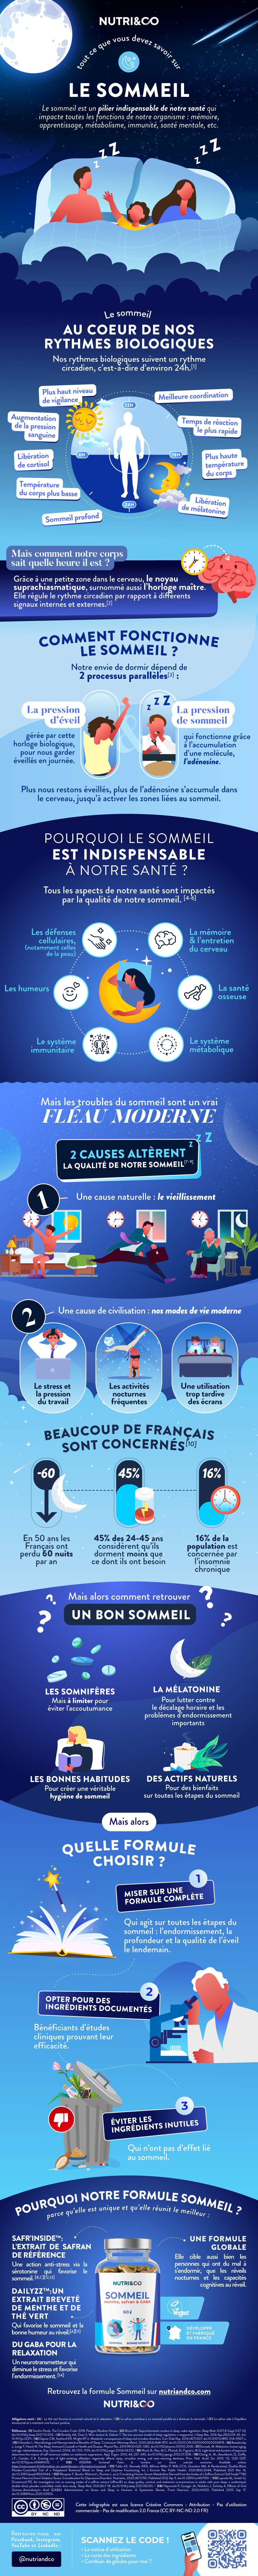 Infographie Sommeil